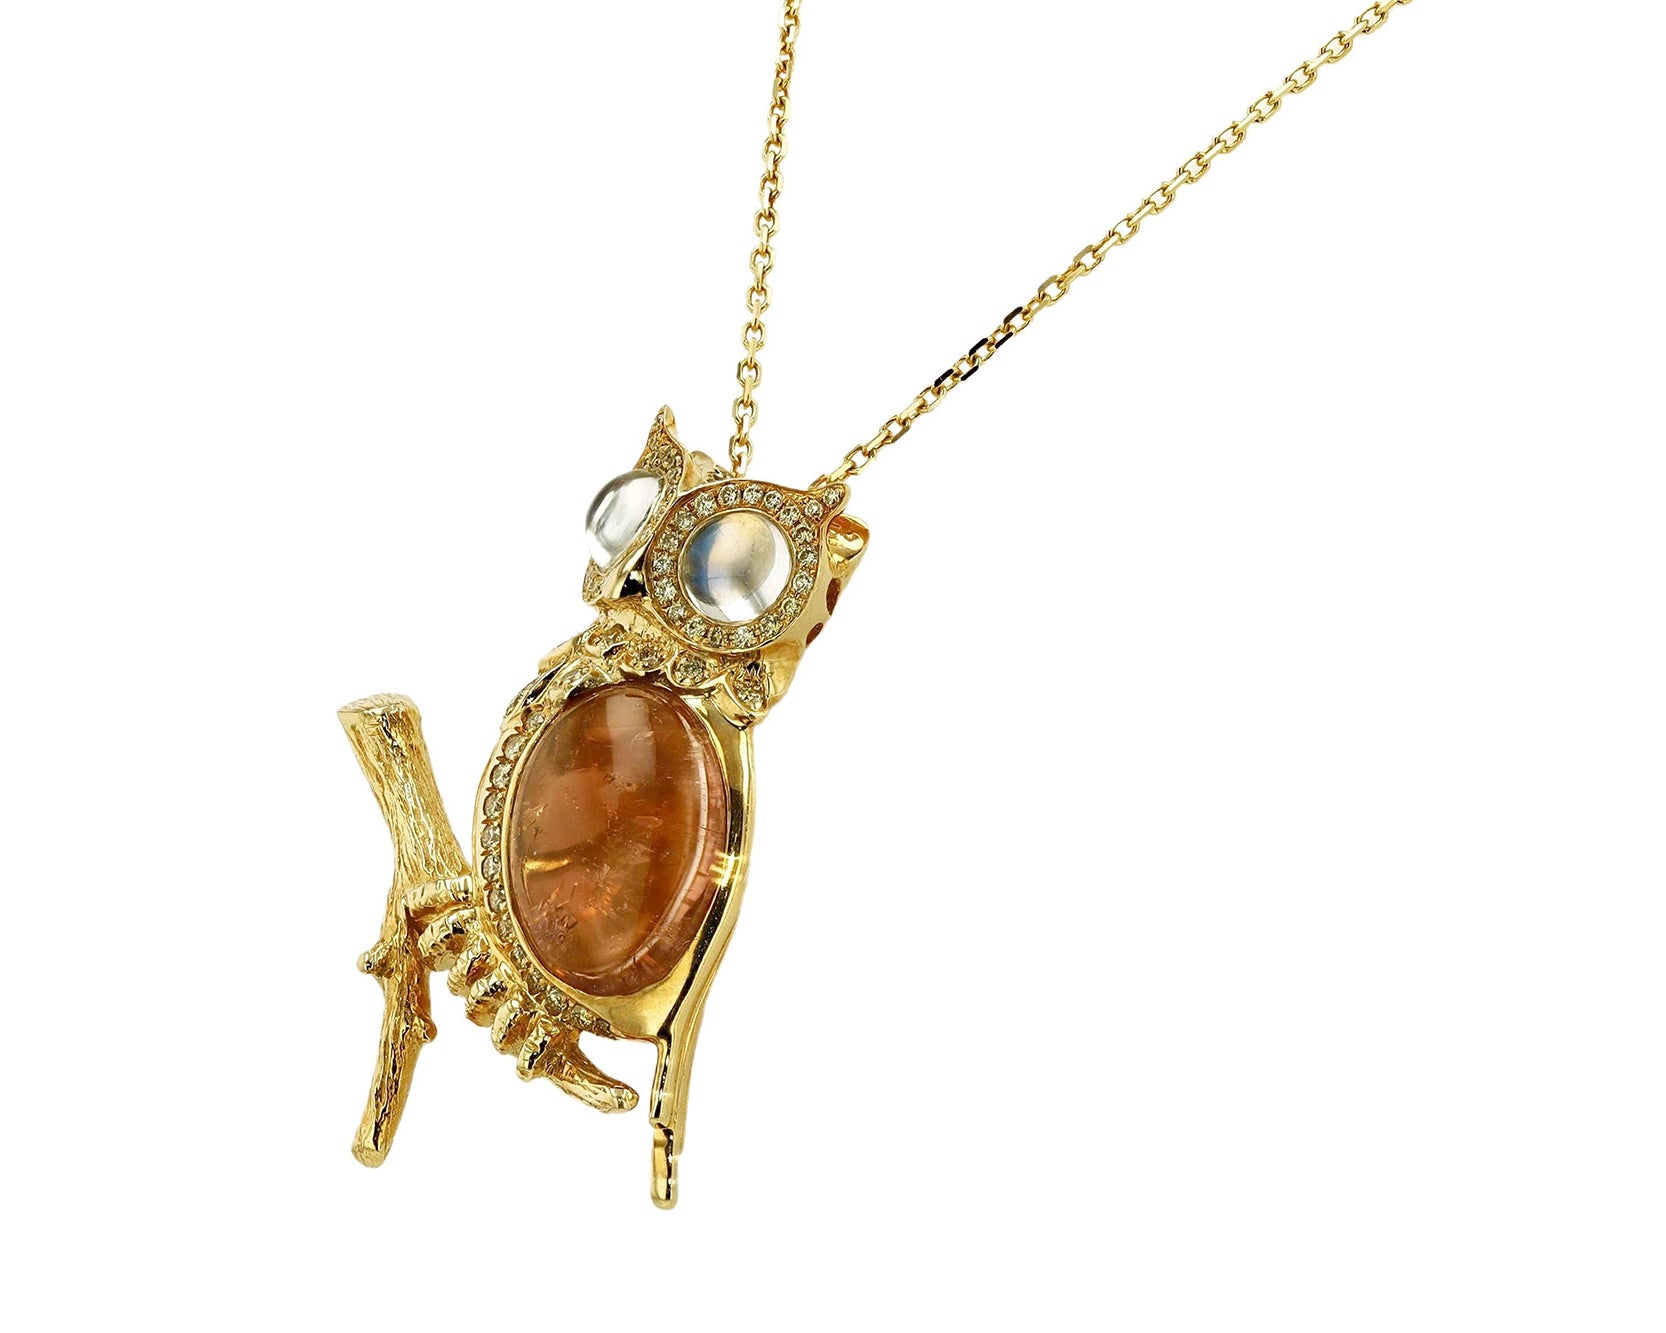 Vintage Tourmaline and Moonstone Owl Necklace